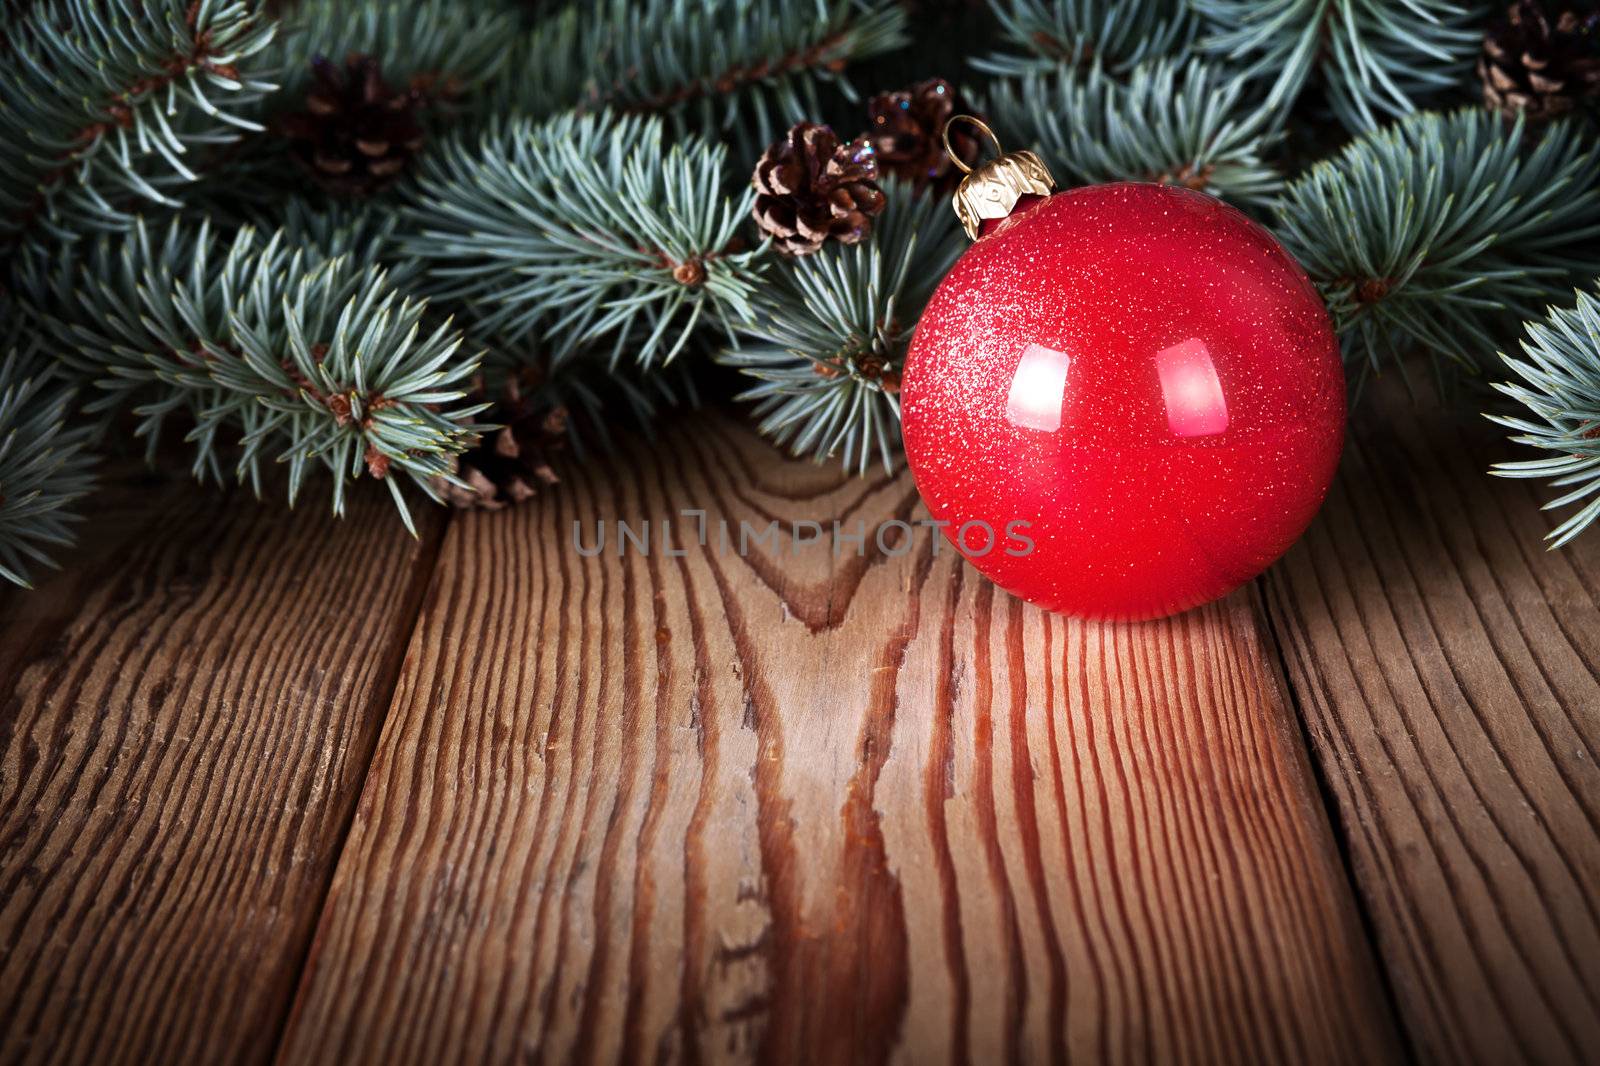 Red christmas ball on wooden background with branches of pine wood. Copy space